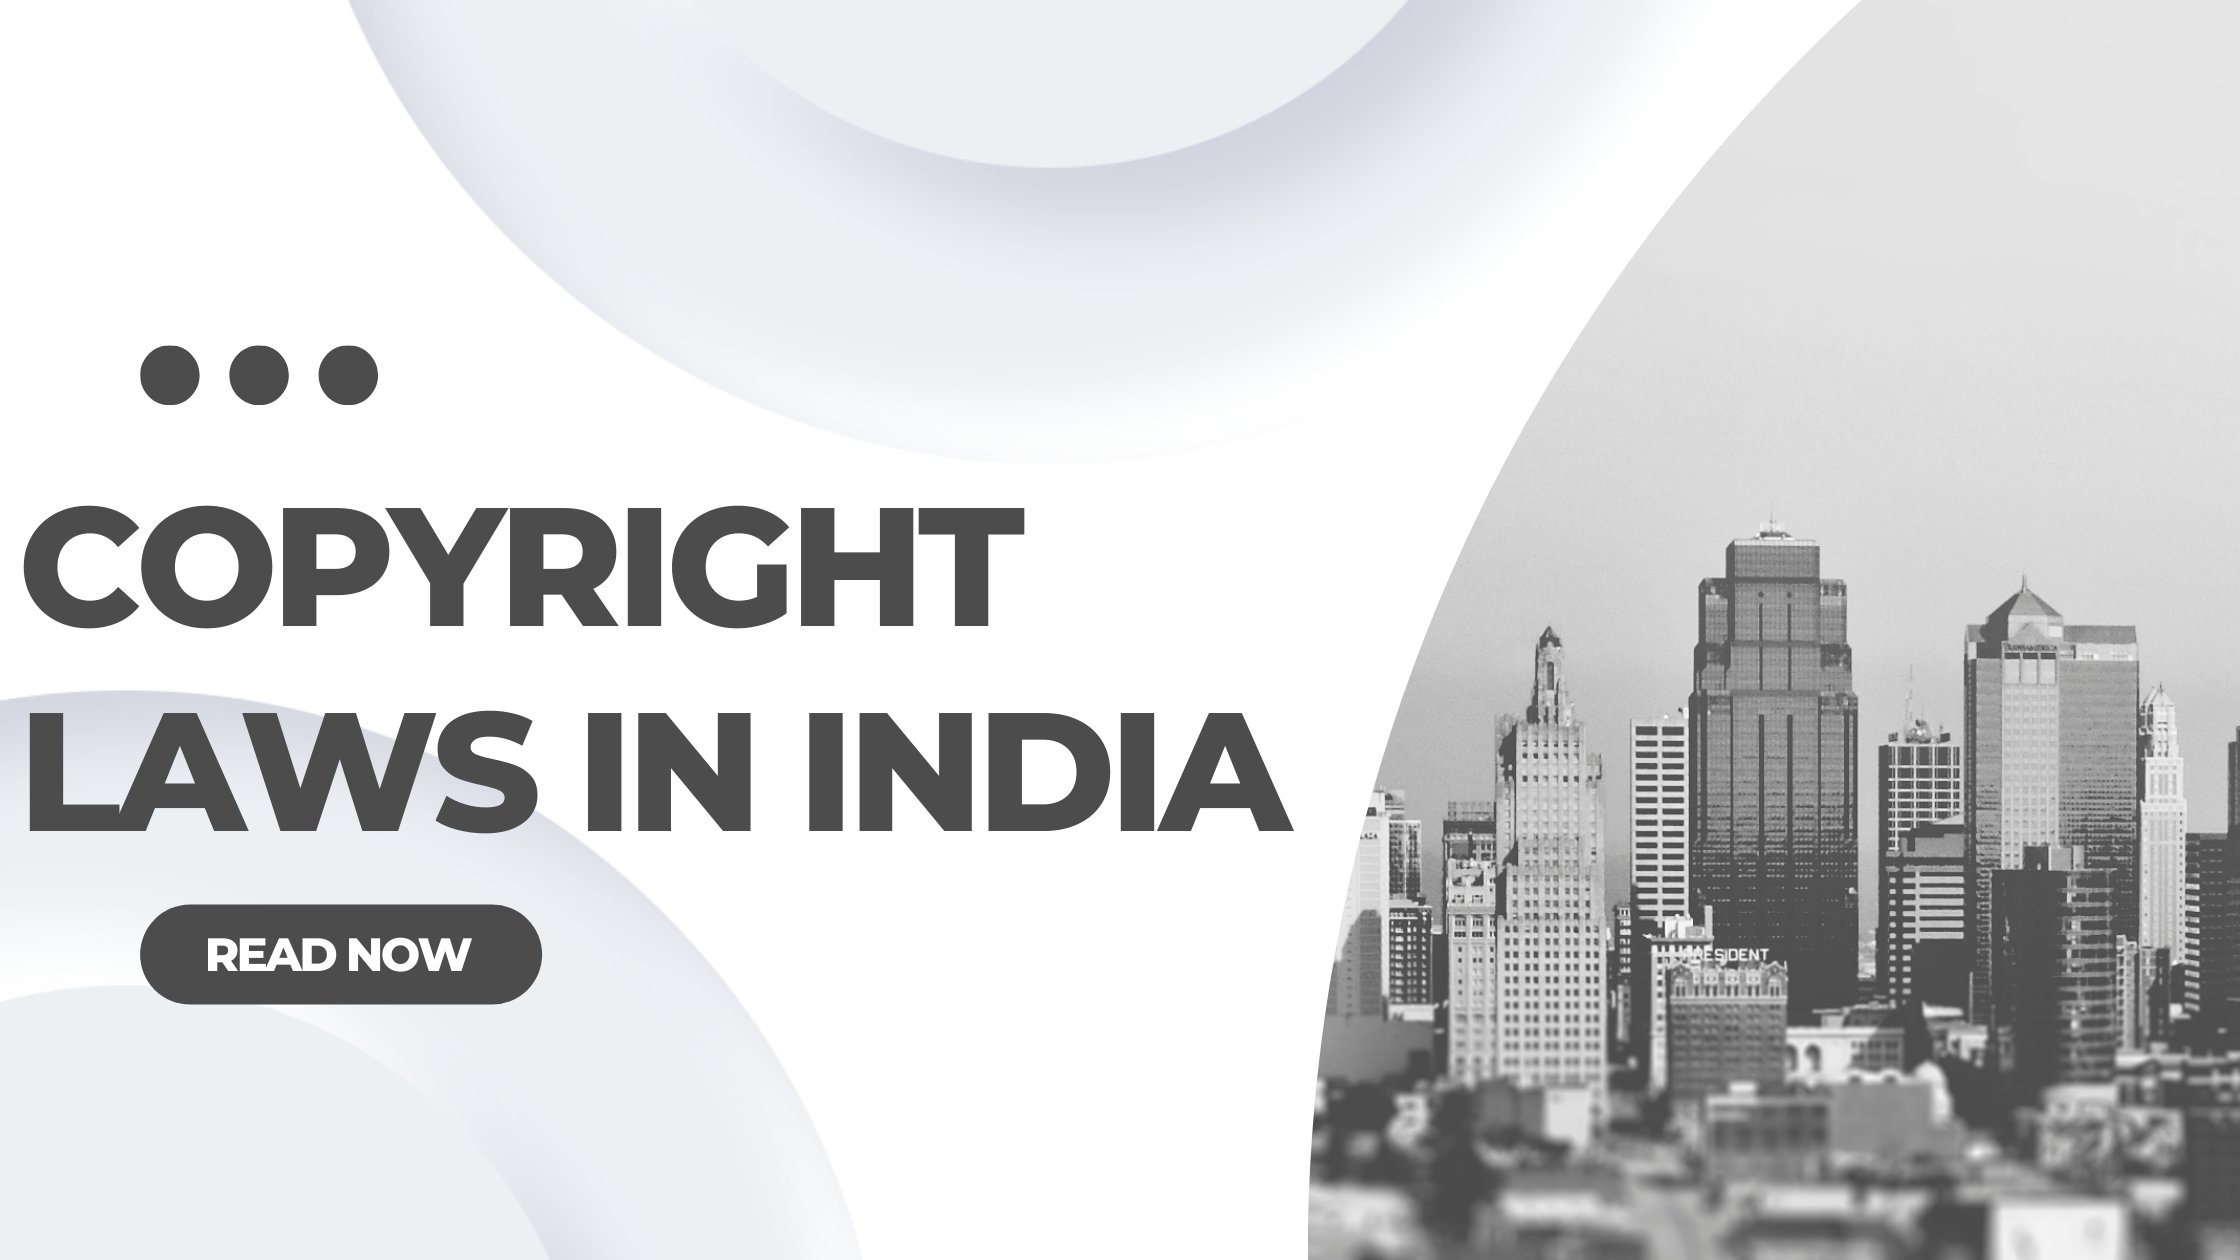 COPYRIGHT LAWS IN INDIA